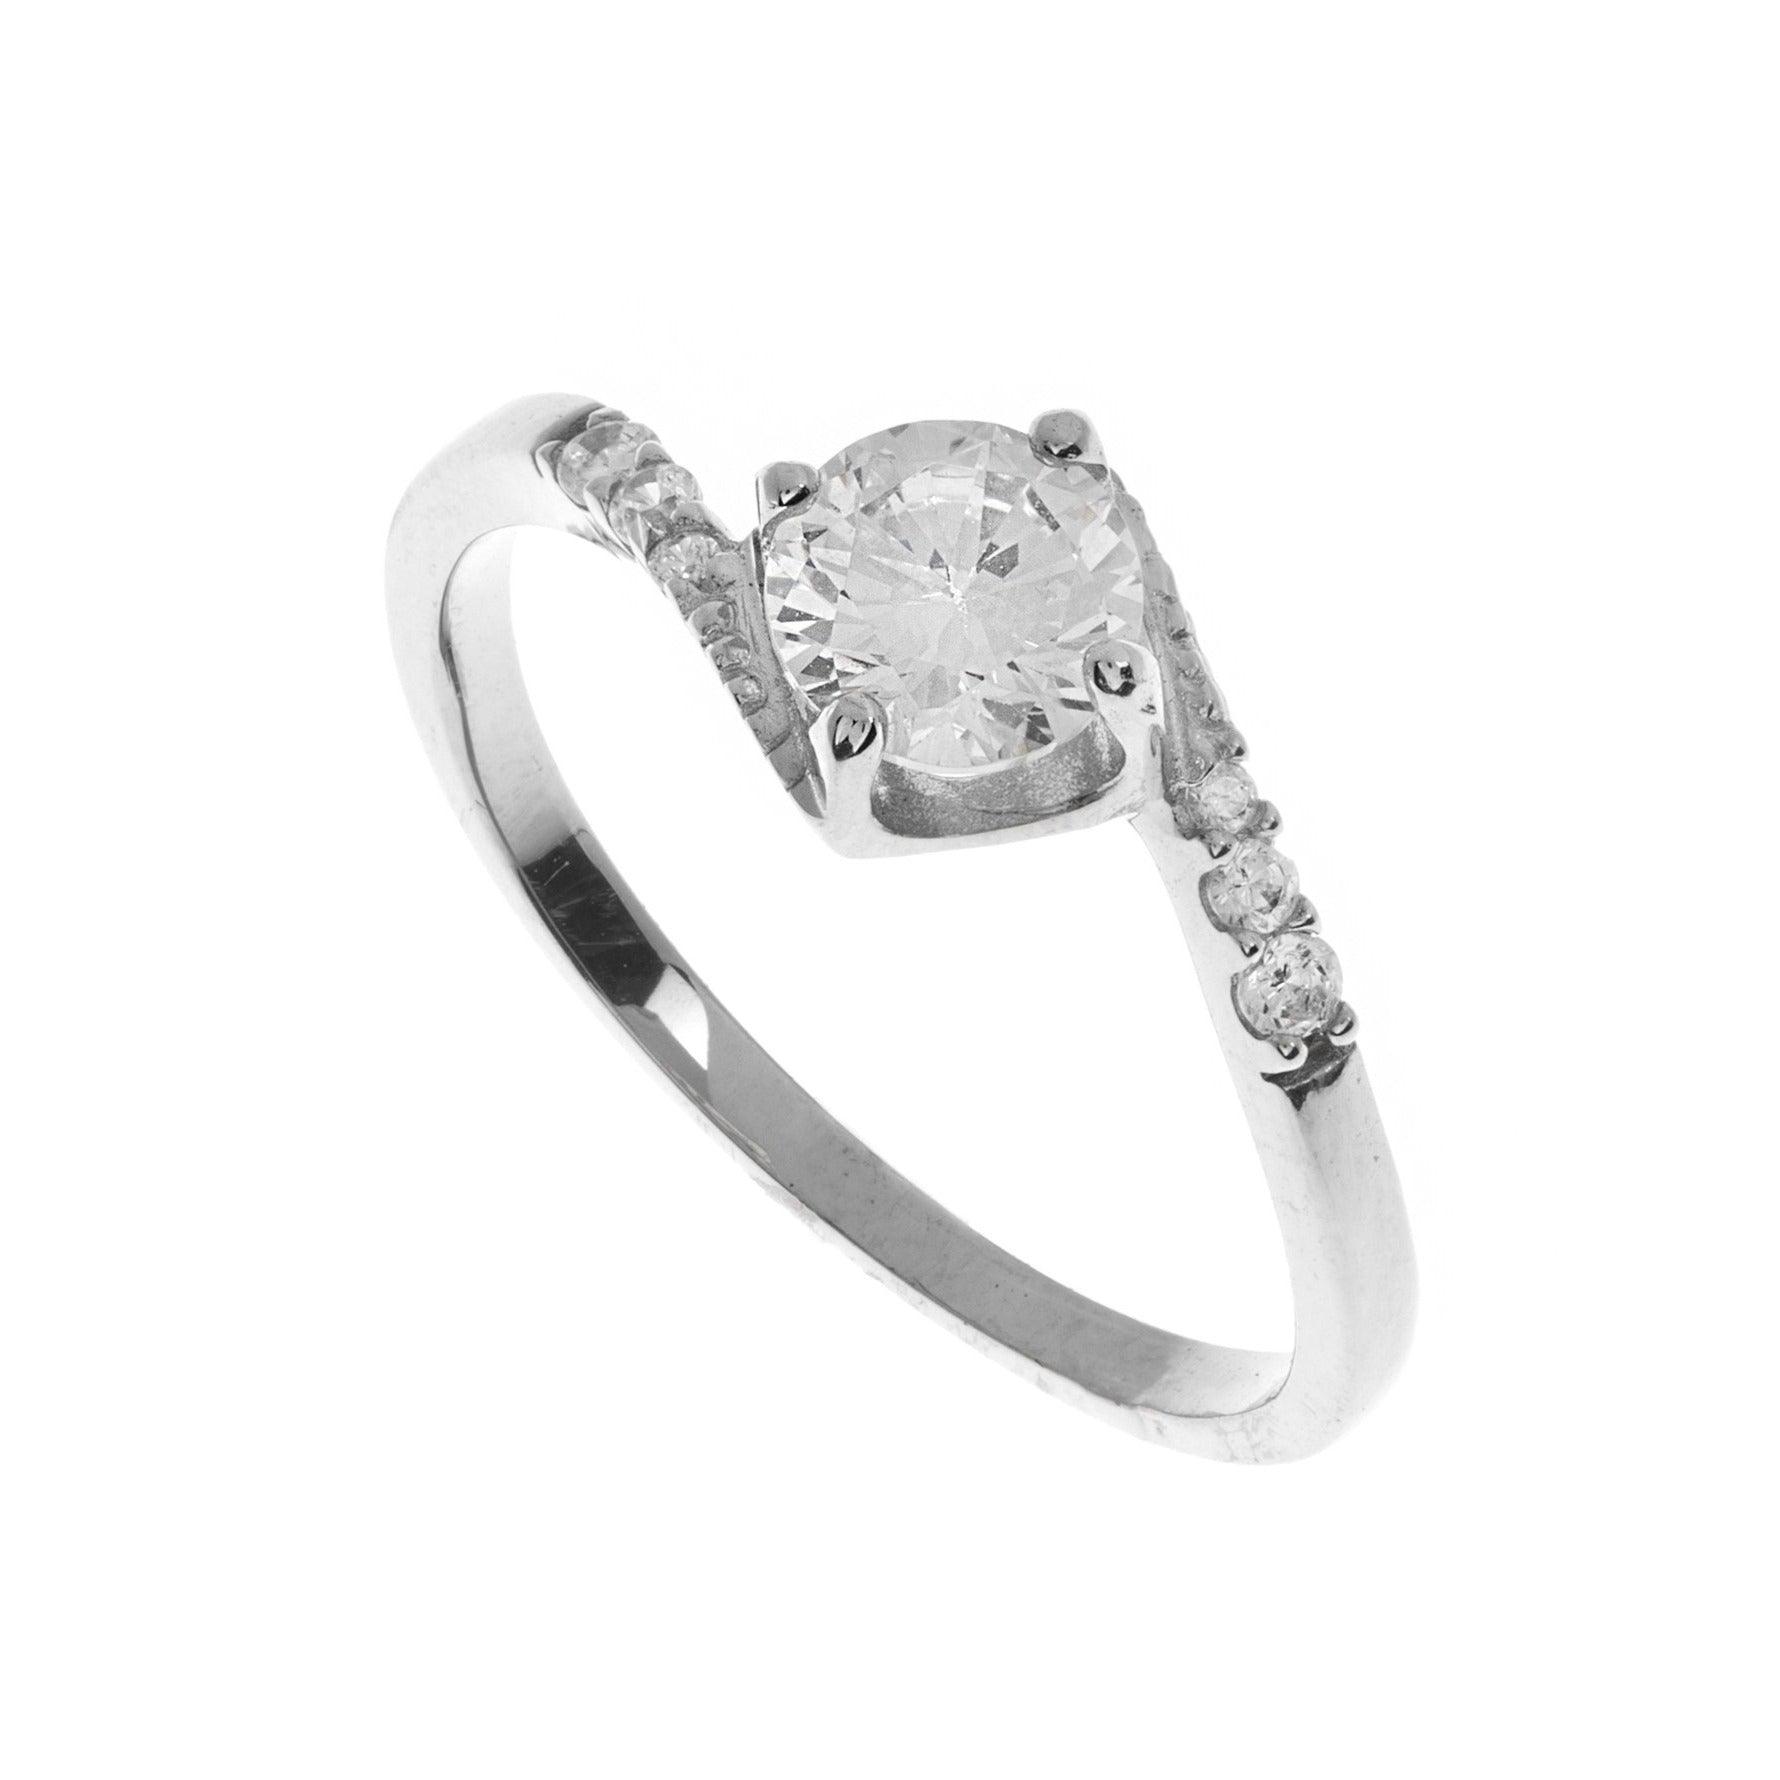 18ct White / Yellow Gold Cubic Zirconia Engagement Ring (LR-3833)